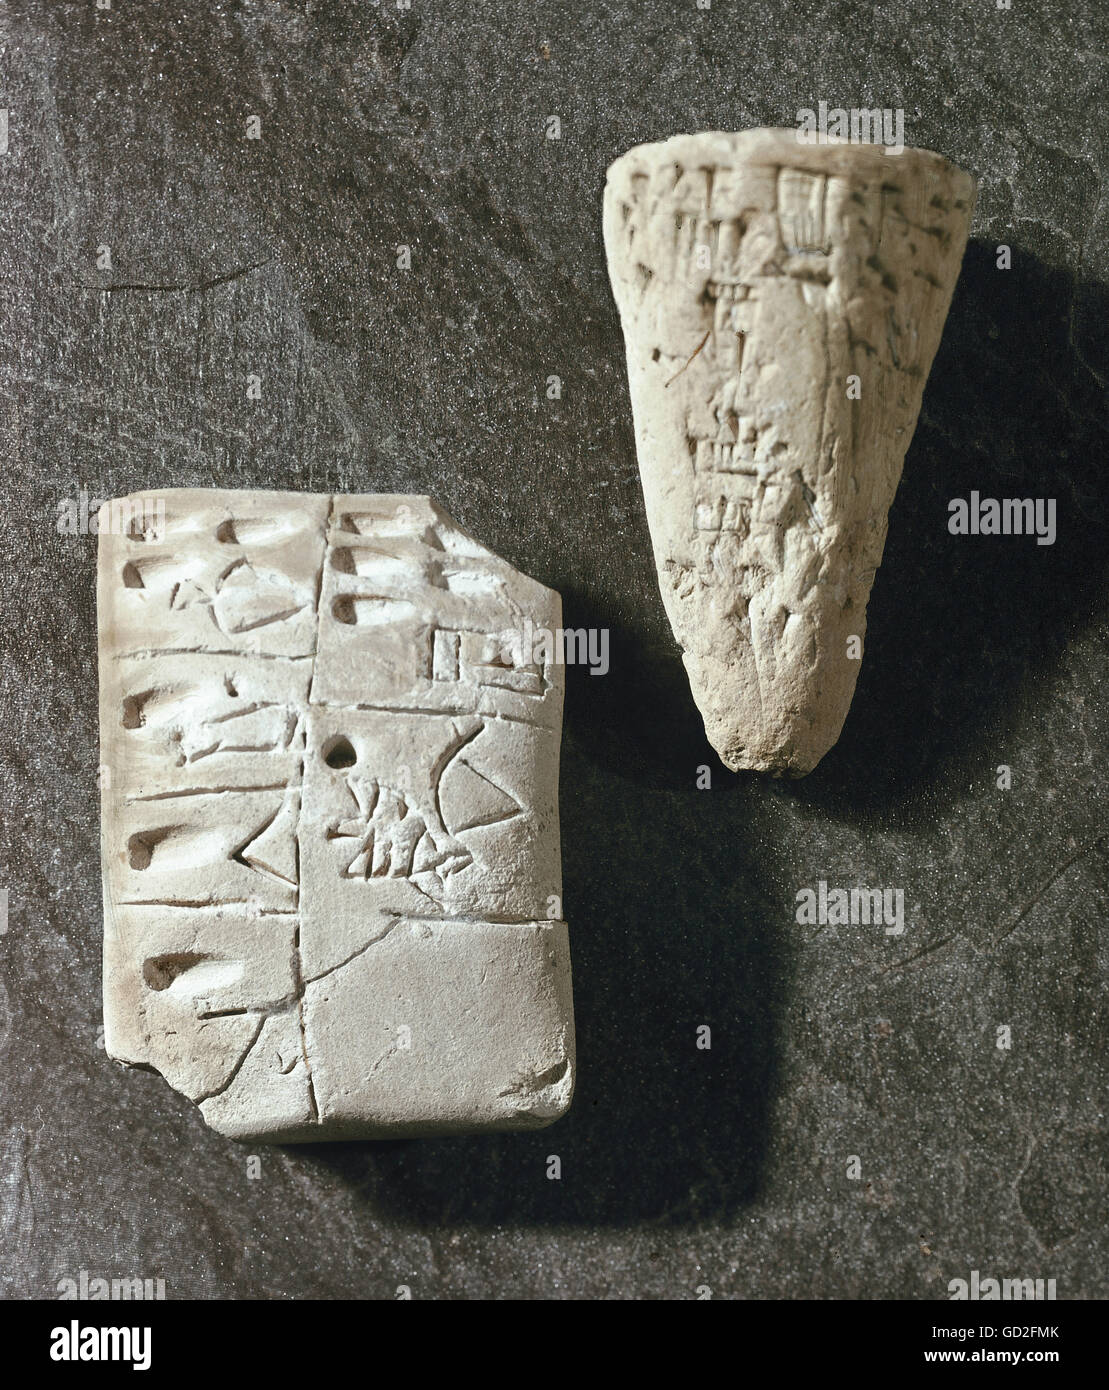 writing, script, cuneiform script, Uruk, left: list of articles, Sumerian, 3300 / 3200 BC, clay, National Museum Baghdad, Iraq, right: nail with inscription, Babylonian, 1860 / 1833 BC, clay, State Archaeological Collection, Munich, administration, inscription, inscriptions, clay tablet, goods, lists, Babylon, Sumer, Mesopotamia, prehistory, prehistoric times, historic, historical, ancient world, Additional-Rights-Clearences-Not Available Stock Photo